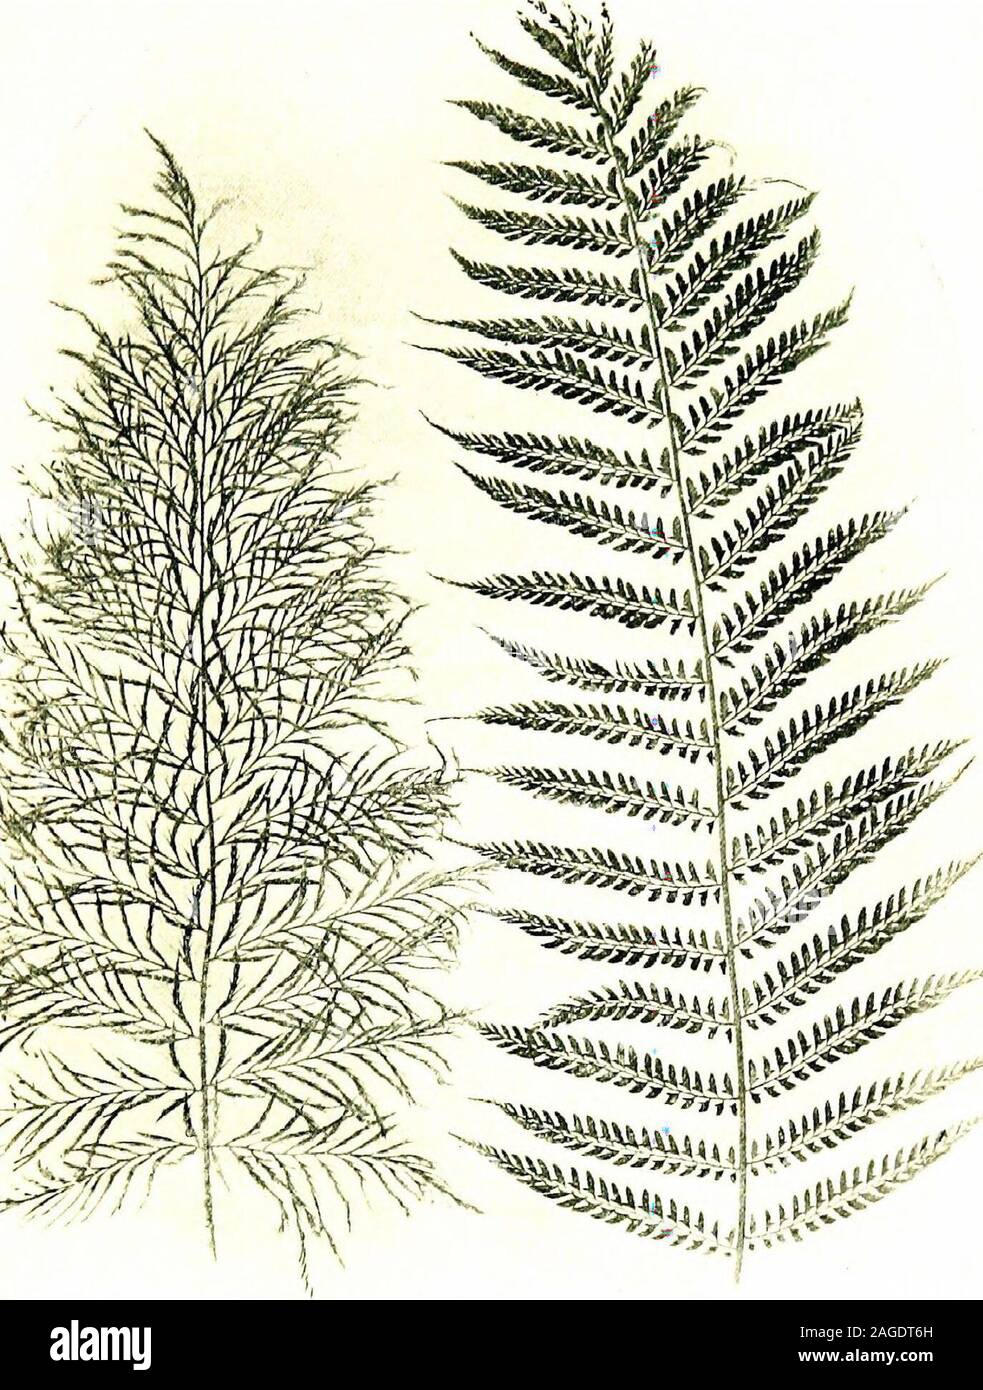 . British ferns and their varieties. e might well be taken for a frond. The thirdcase of Polystichum aculeatum is equally astounding as representinga sudden metamorphosis of type, and is peculiar as affording suchresults after many years of reputed sterility. In 1876 there wasfound by a farm labourer, in a Dorsetshire hedge, a very fine formof the Hard Shield Fern, which he took to Dr. Wills, one of ourmost successful collectors in the locality, who named it pul-cherrimum, on account of its peculiar beauty. It was apparentlyan entirely barren Fern, but eventually found its way into manycollect Stock Photo